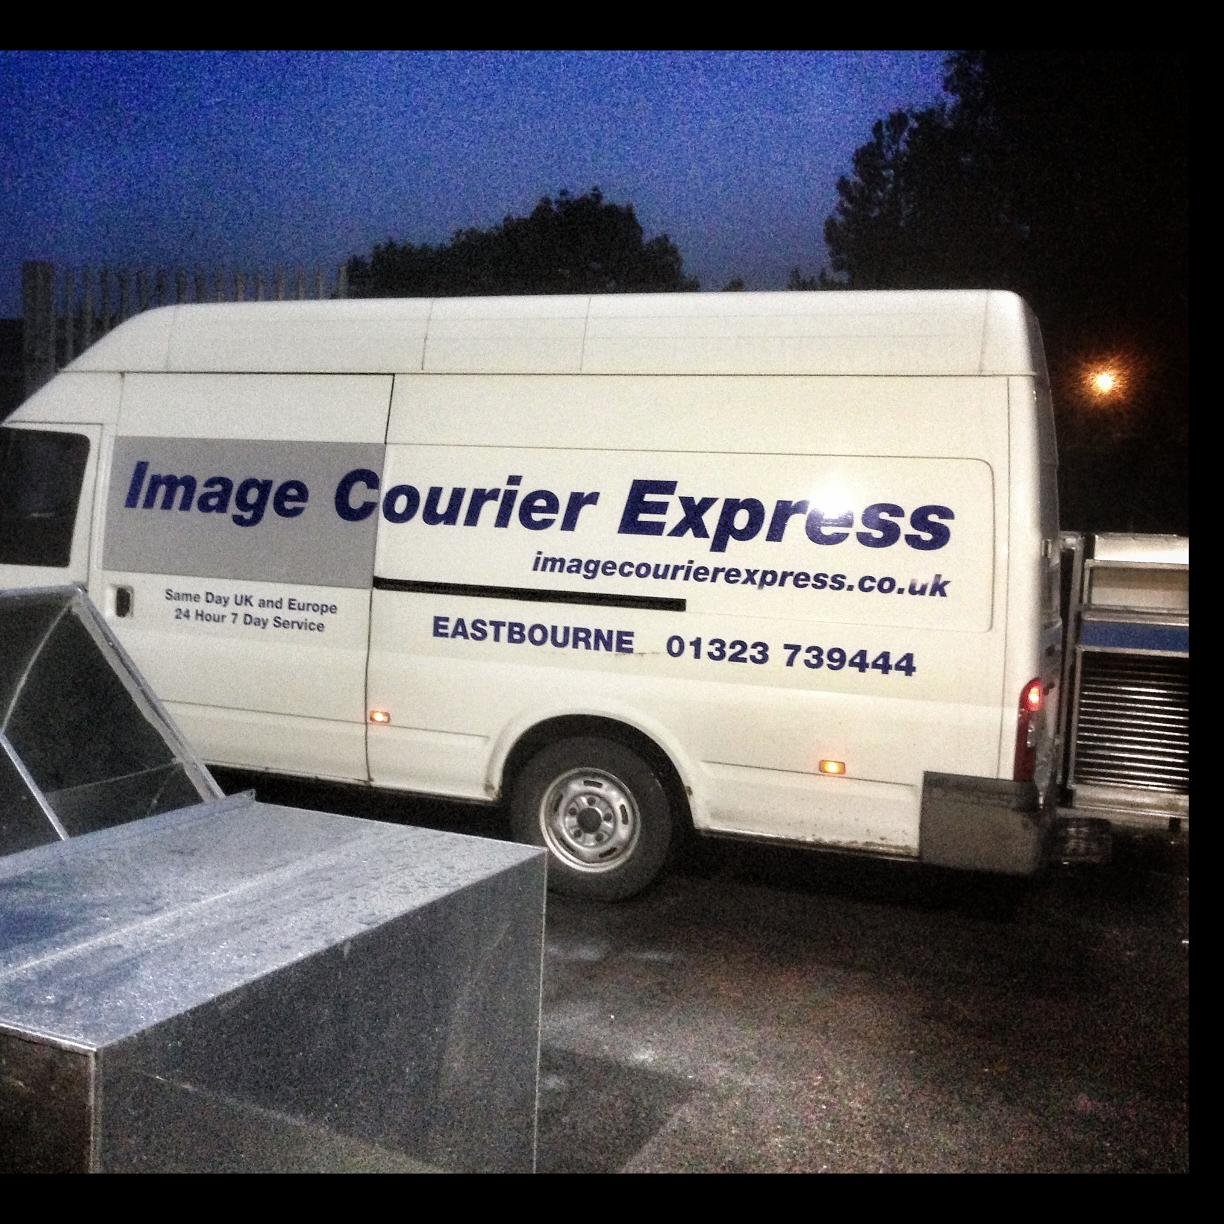 Based in Eastbourne, Sussex, Image Courier Express offer a cost-effective, fully-tailored transport solution specialising in same day delivery services.